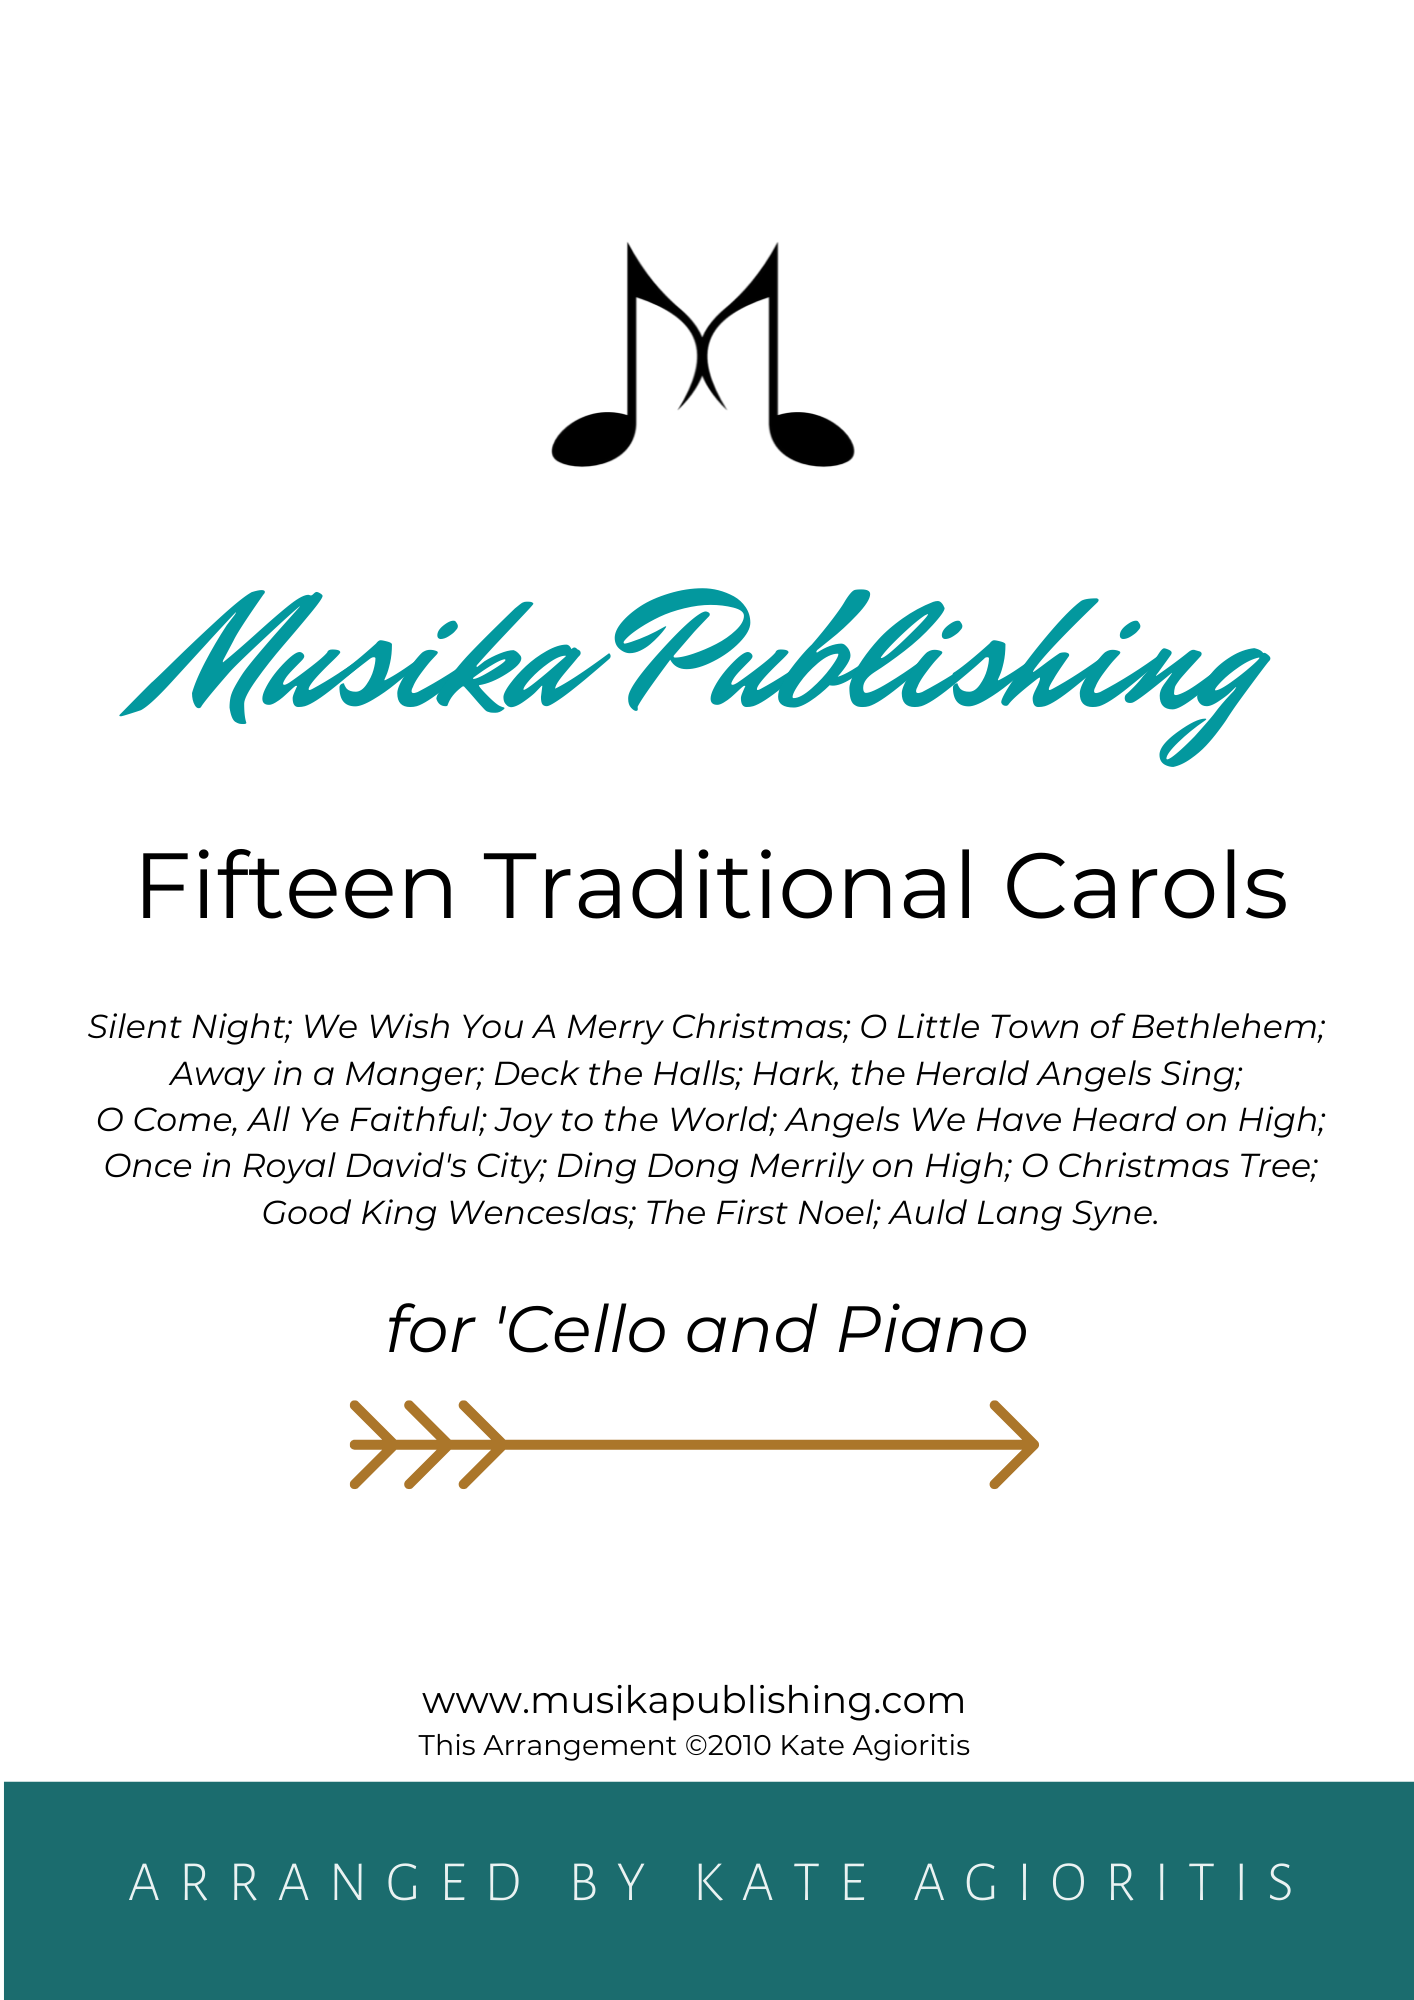 Fifteen Traditional Carols - for 'Cello and Piano